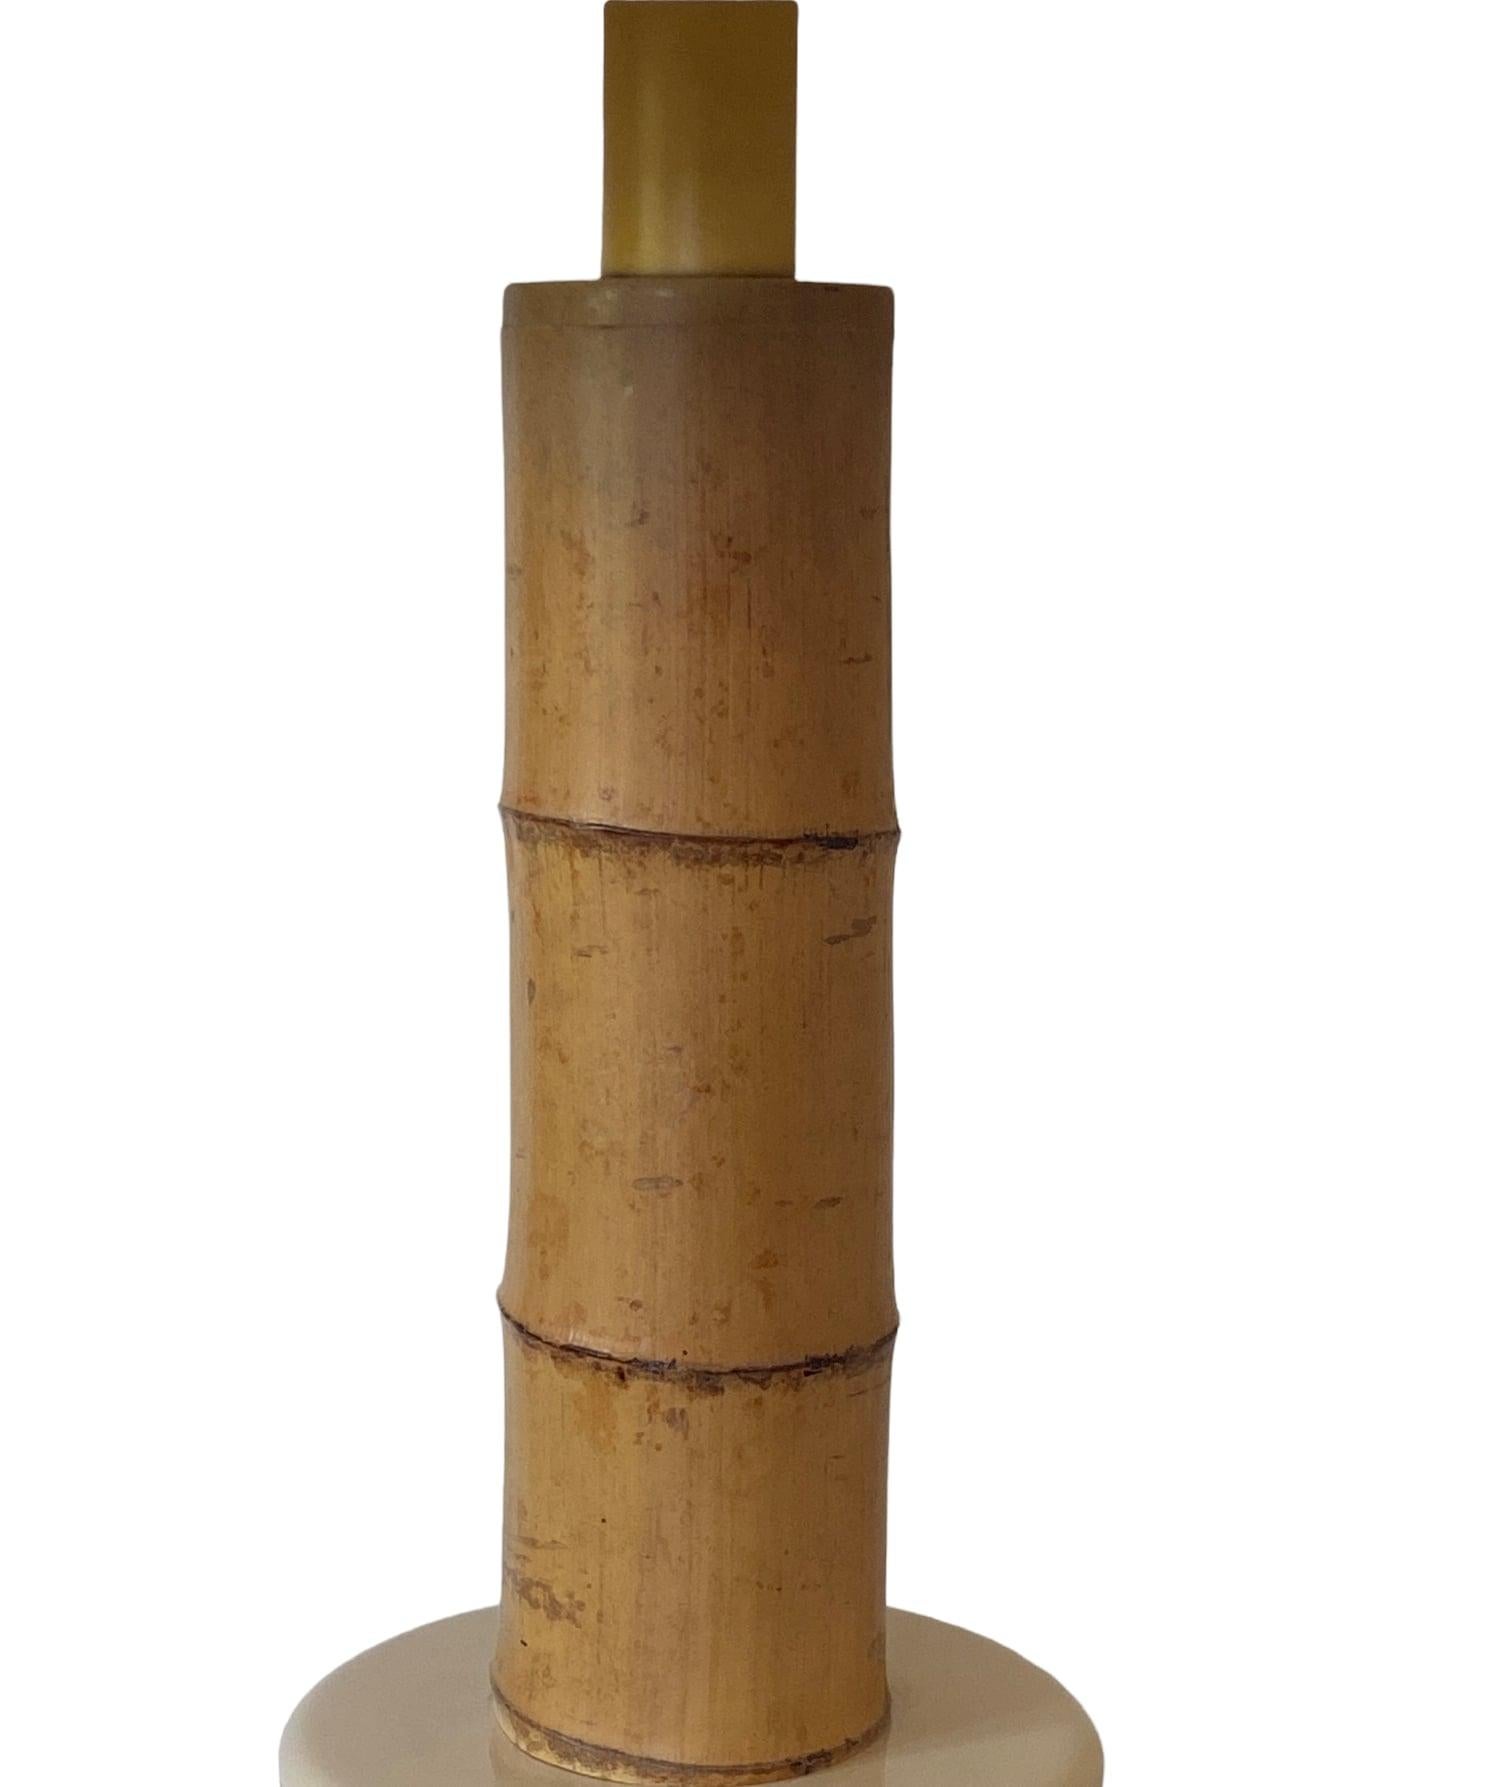 Hollywood Regency Great Bamboo Table Lamp, RCM 1867 Italy, 1970s For Sale 2